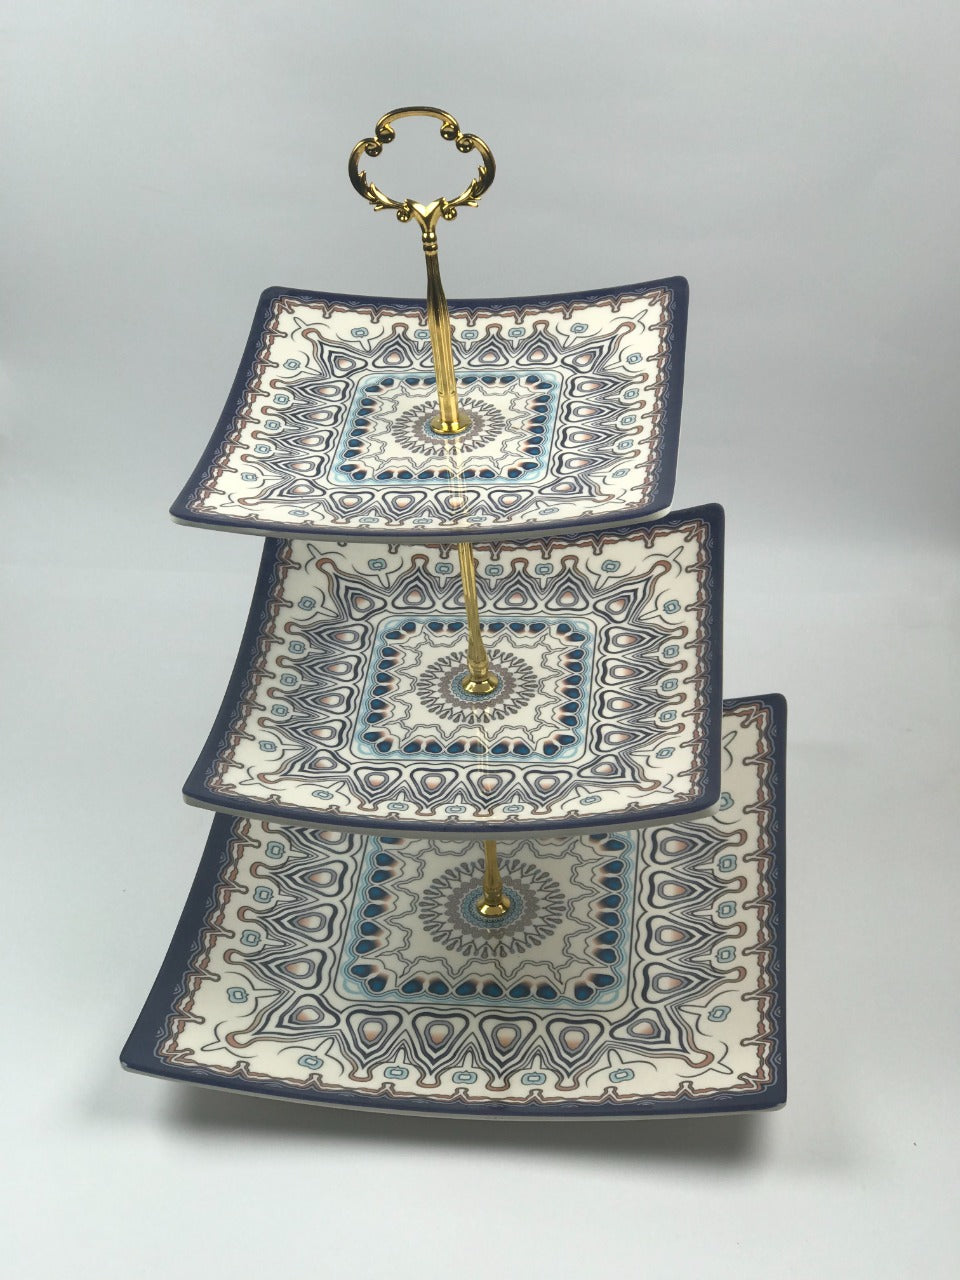 3 Tier Malamine Floral Serving Tray